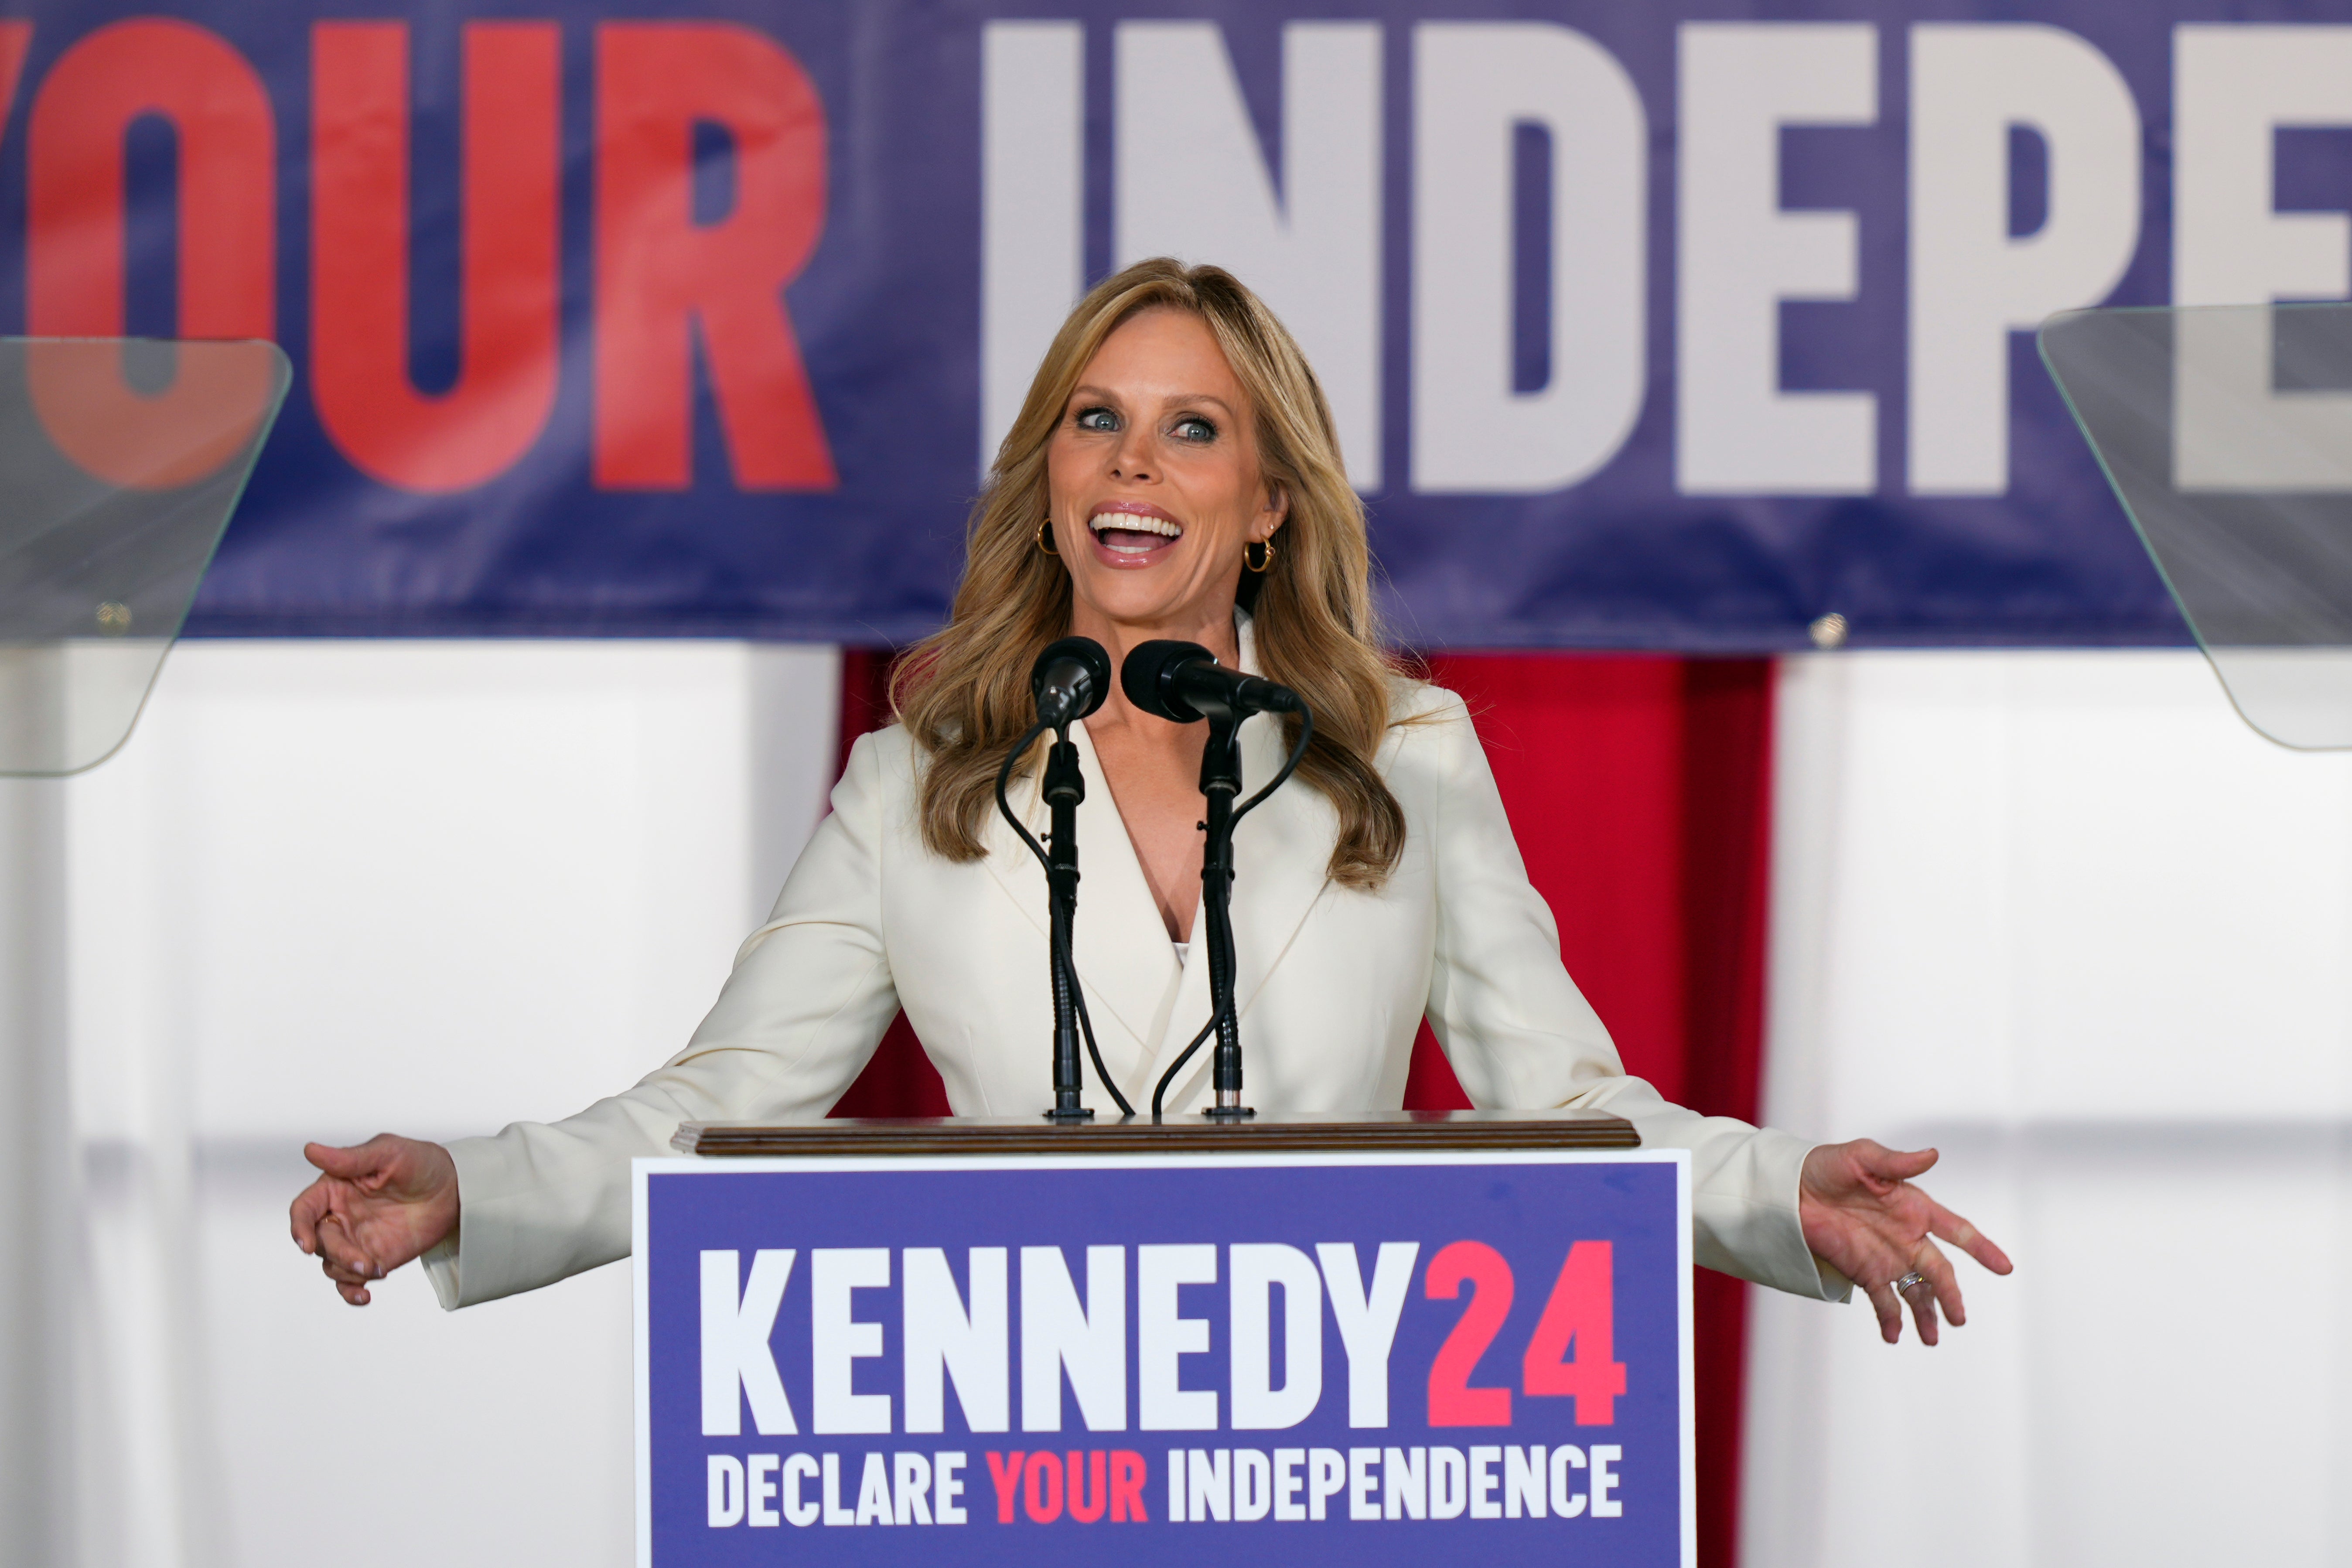 Cheryl Hines, wife of presidential candidate Robert F Kennedy Jr, speaks during a campaign event in Philadelphia on Monday